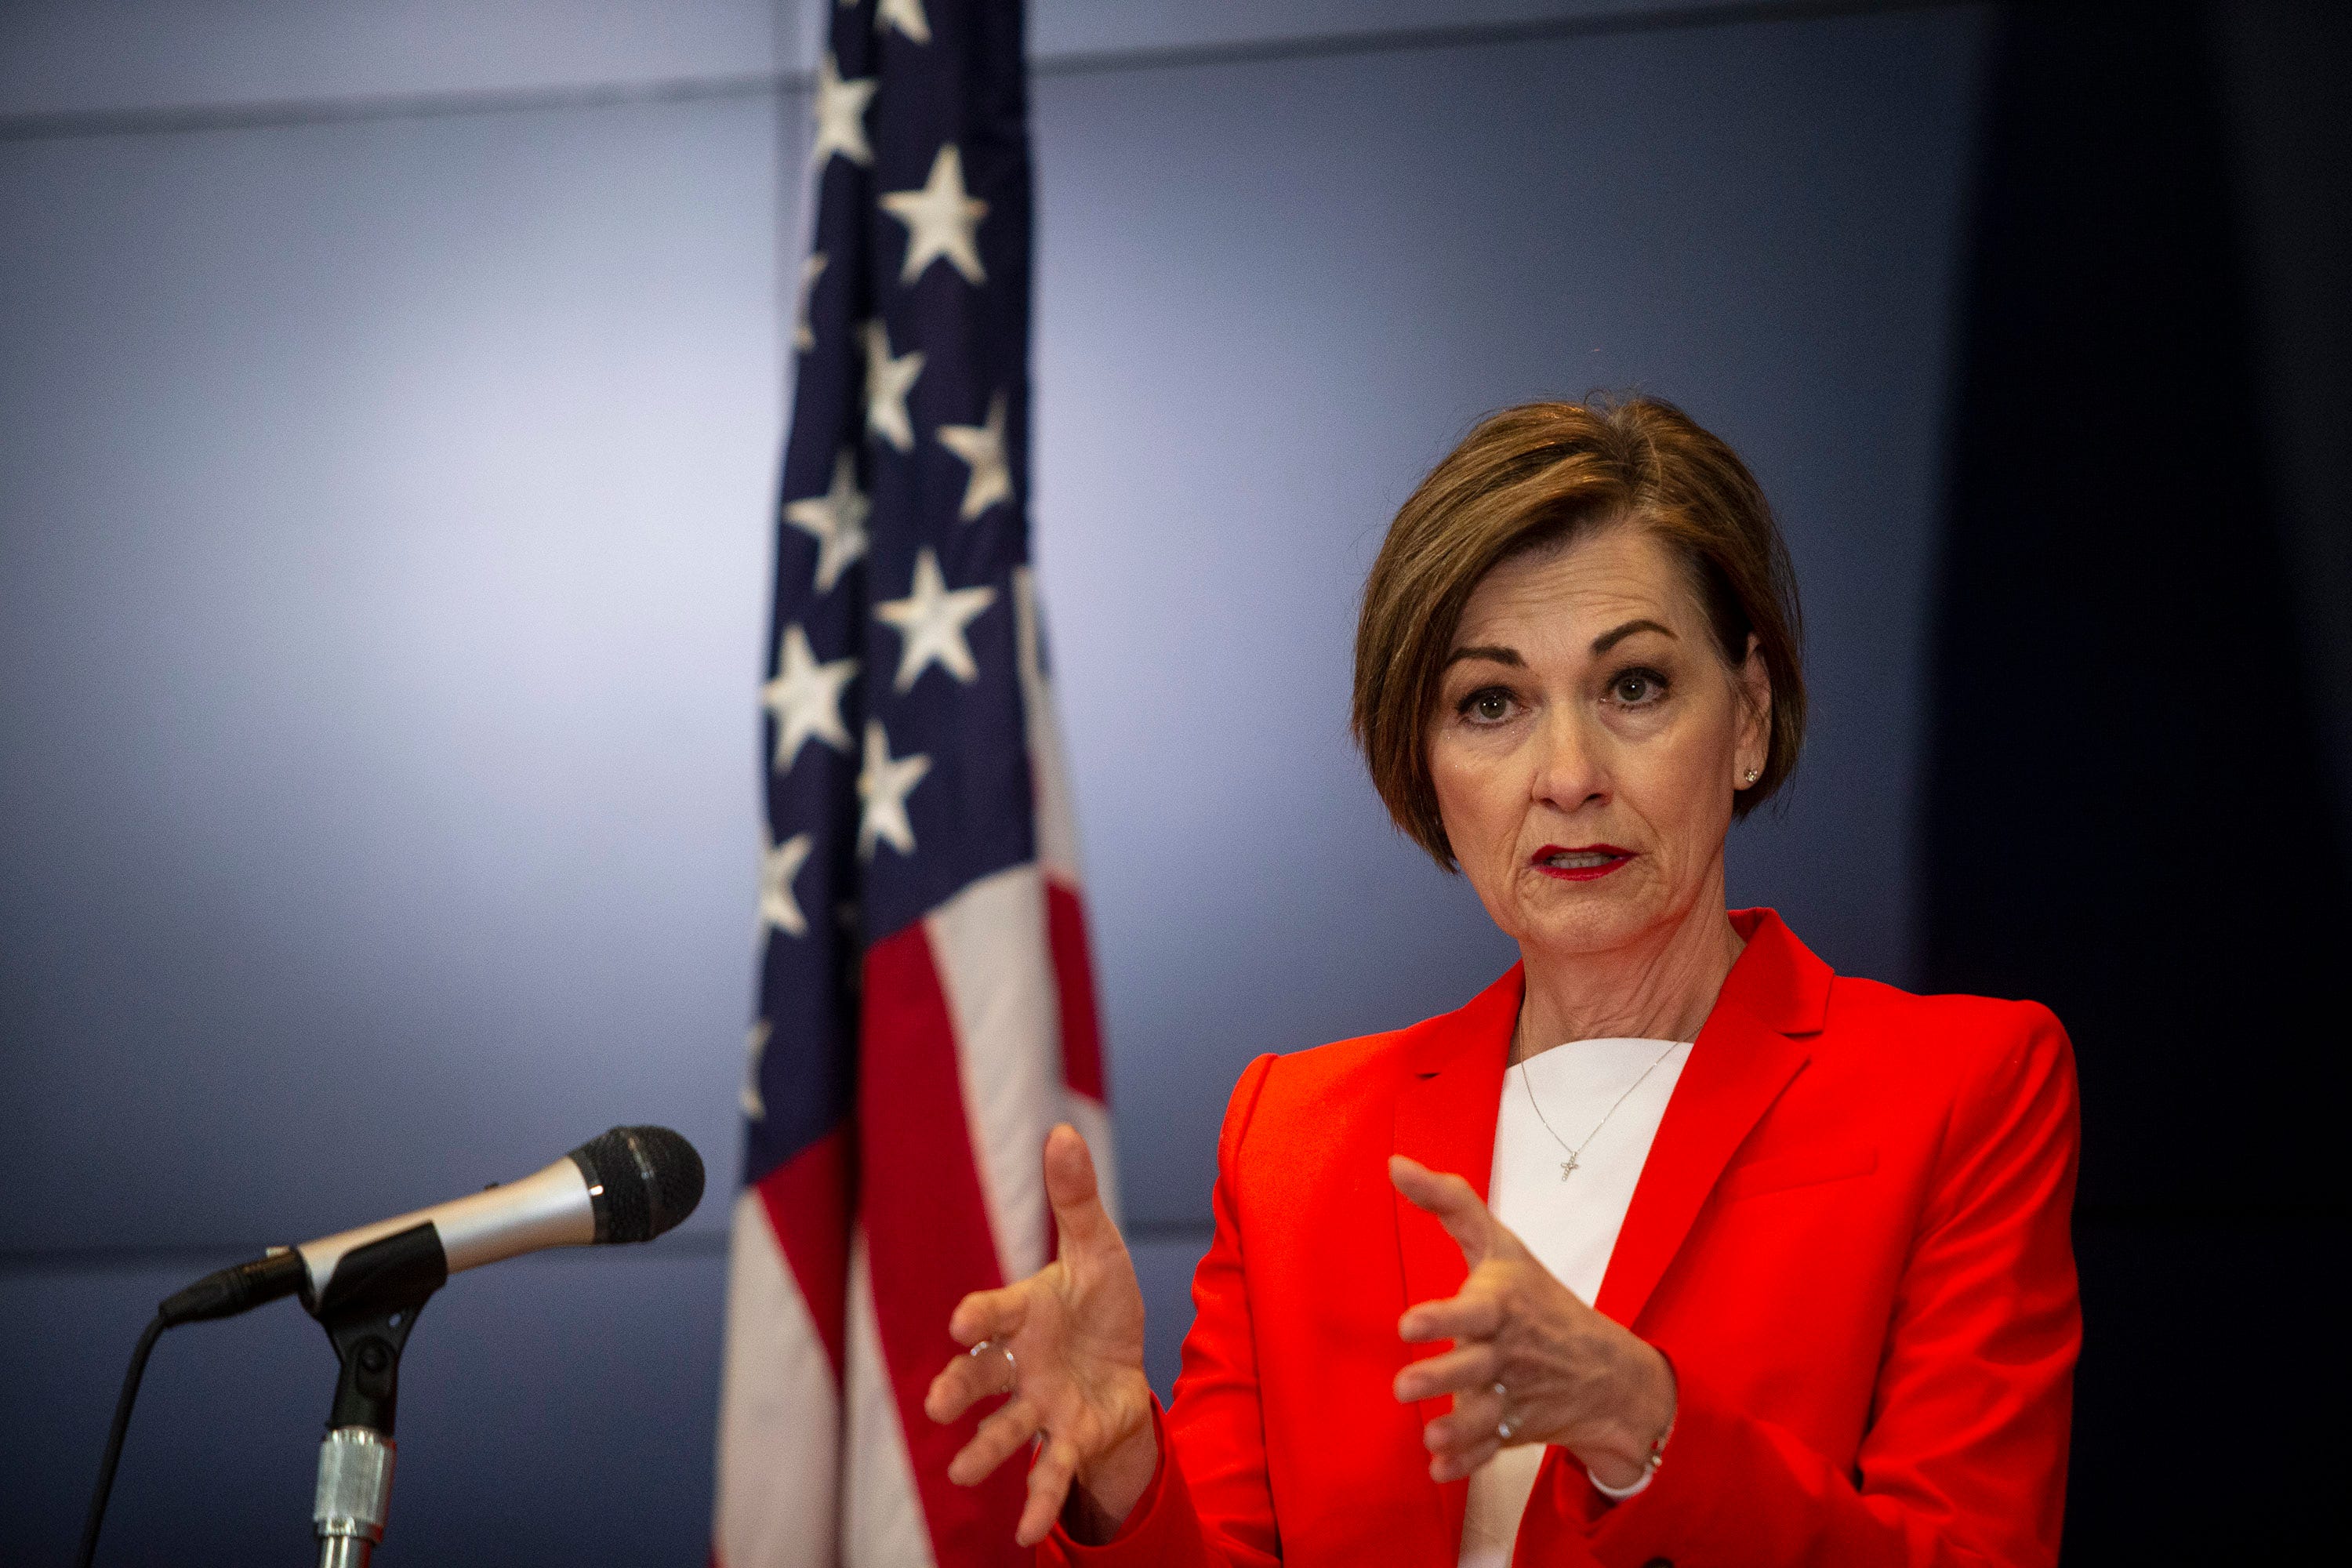 Governor Kim Reynolds speaks to the press during the daily coronavirus news conference on Wednesday, April 8, 2020, at the State Emergency Operations Center in Johnston, Iowa.